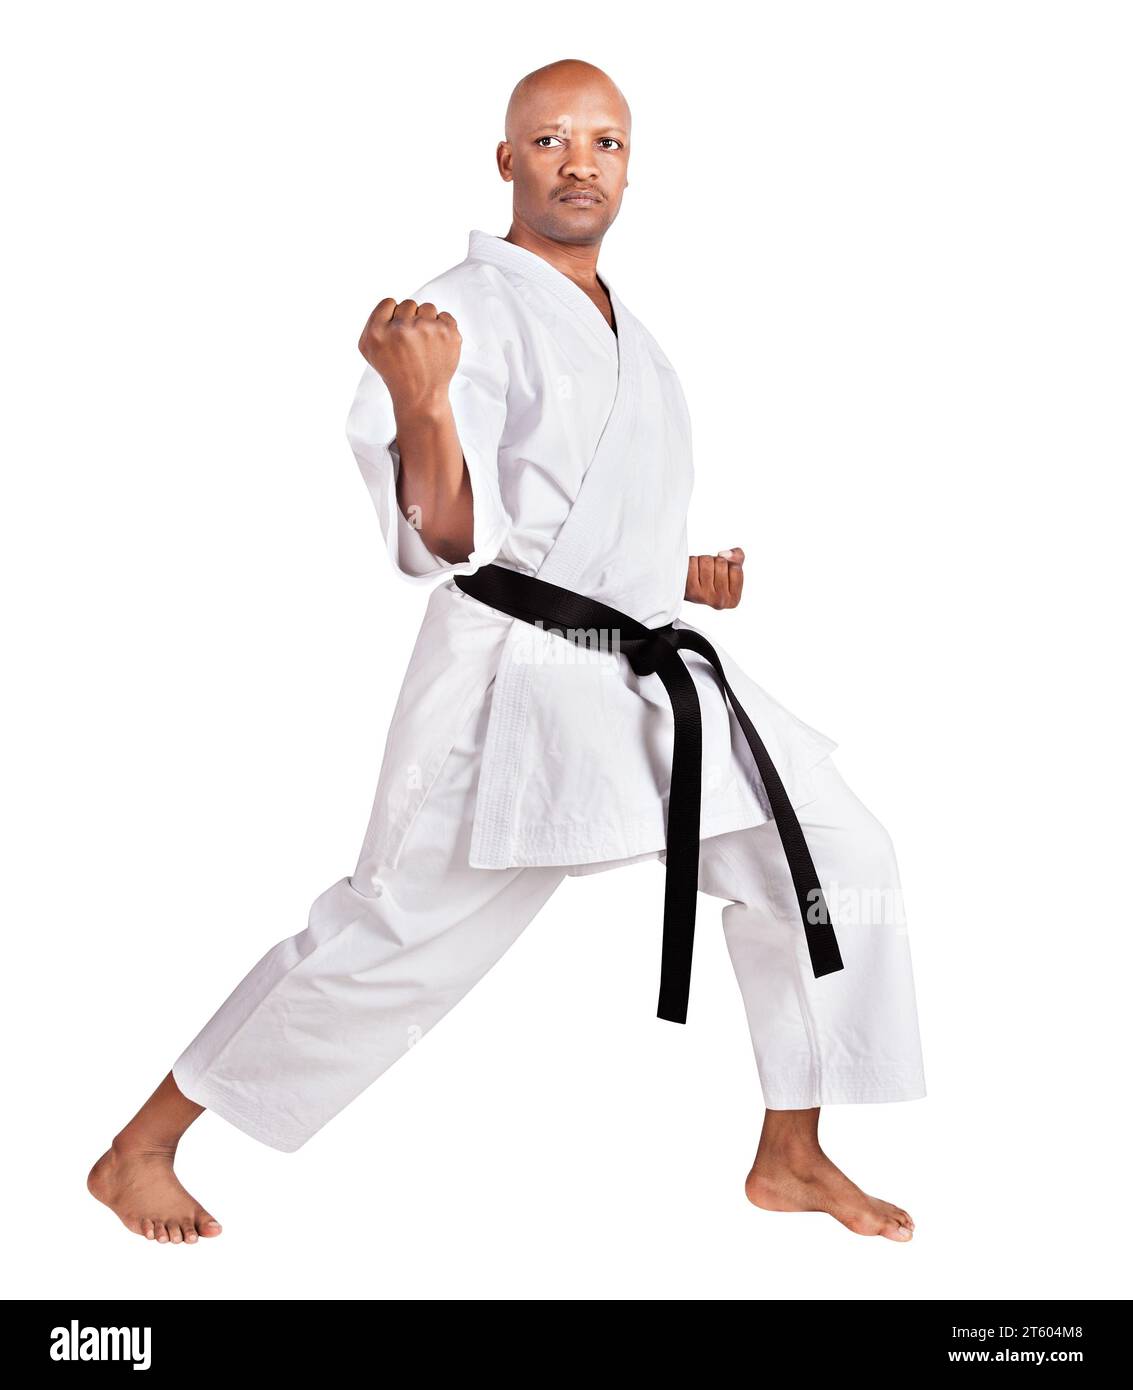 african american karate man in a kumite stance, exercising his kata, in white kimono uniform with belt Stock Photo